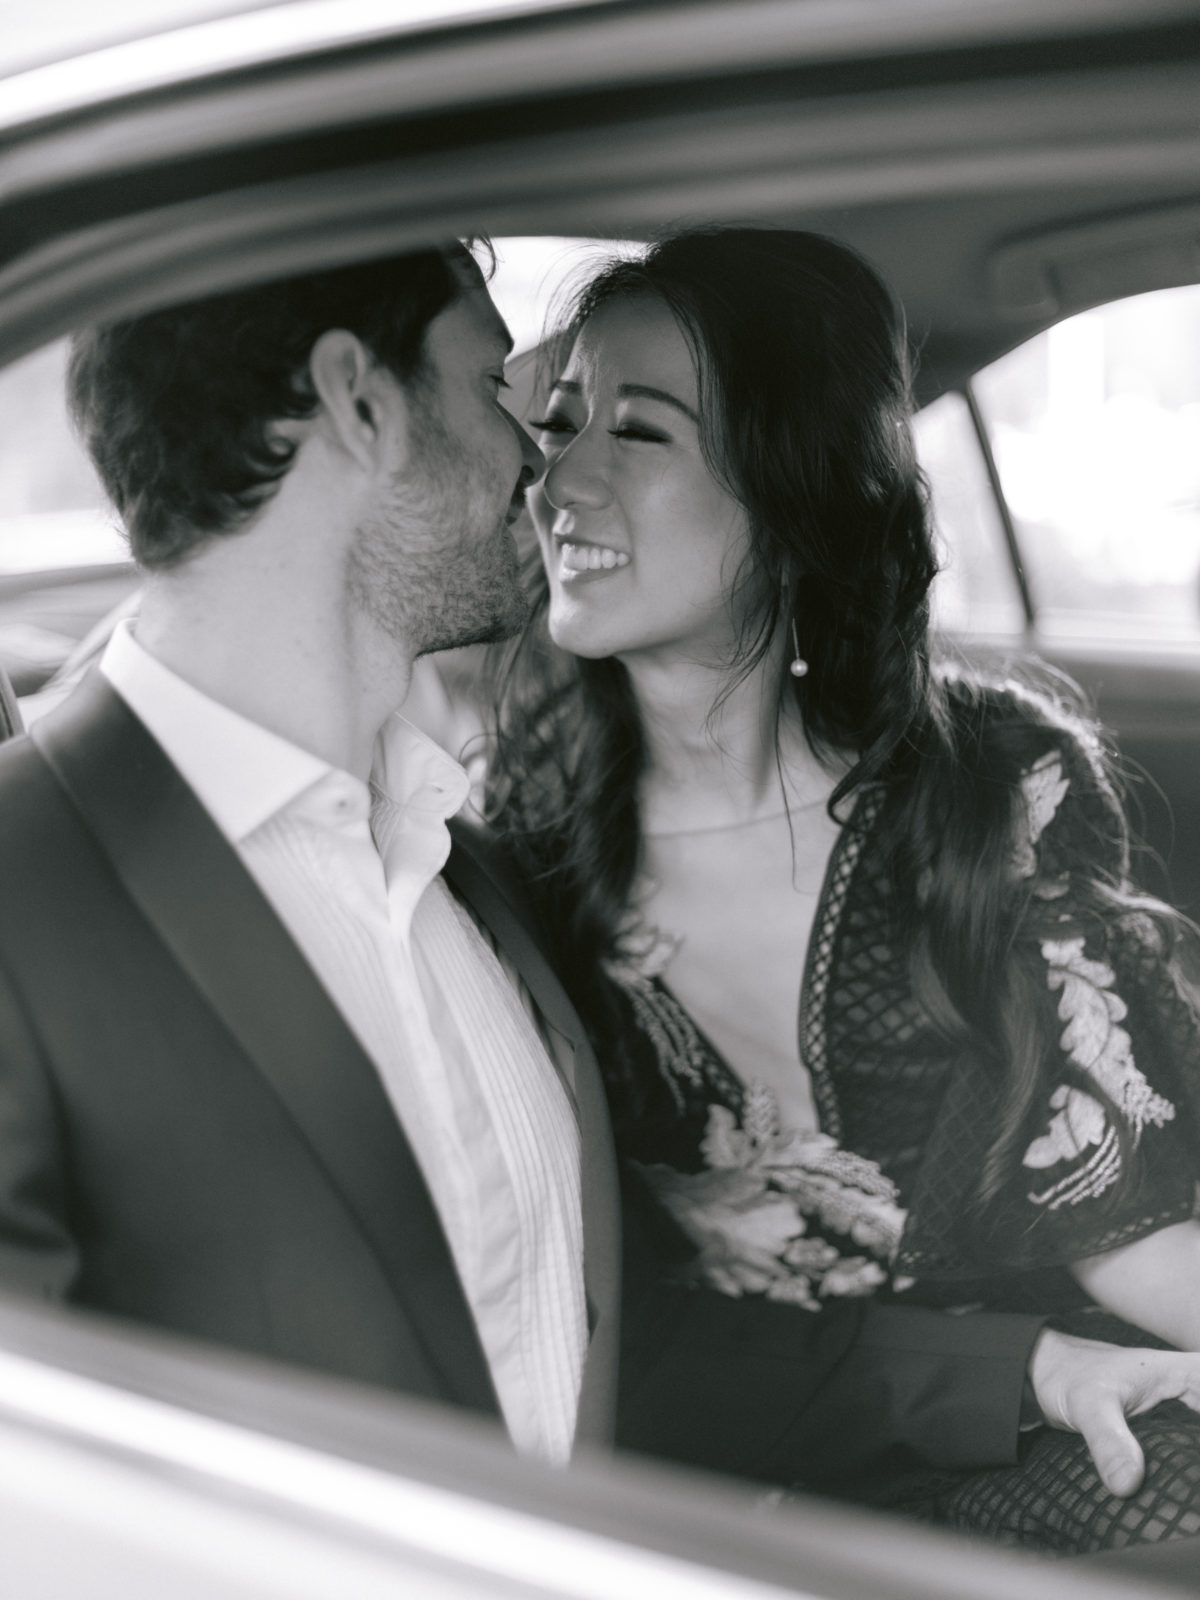 New York Taxi Engagement Session